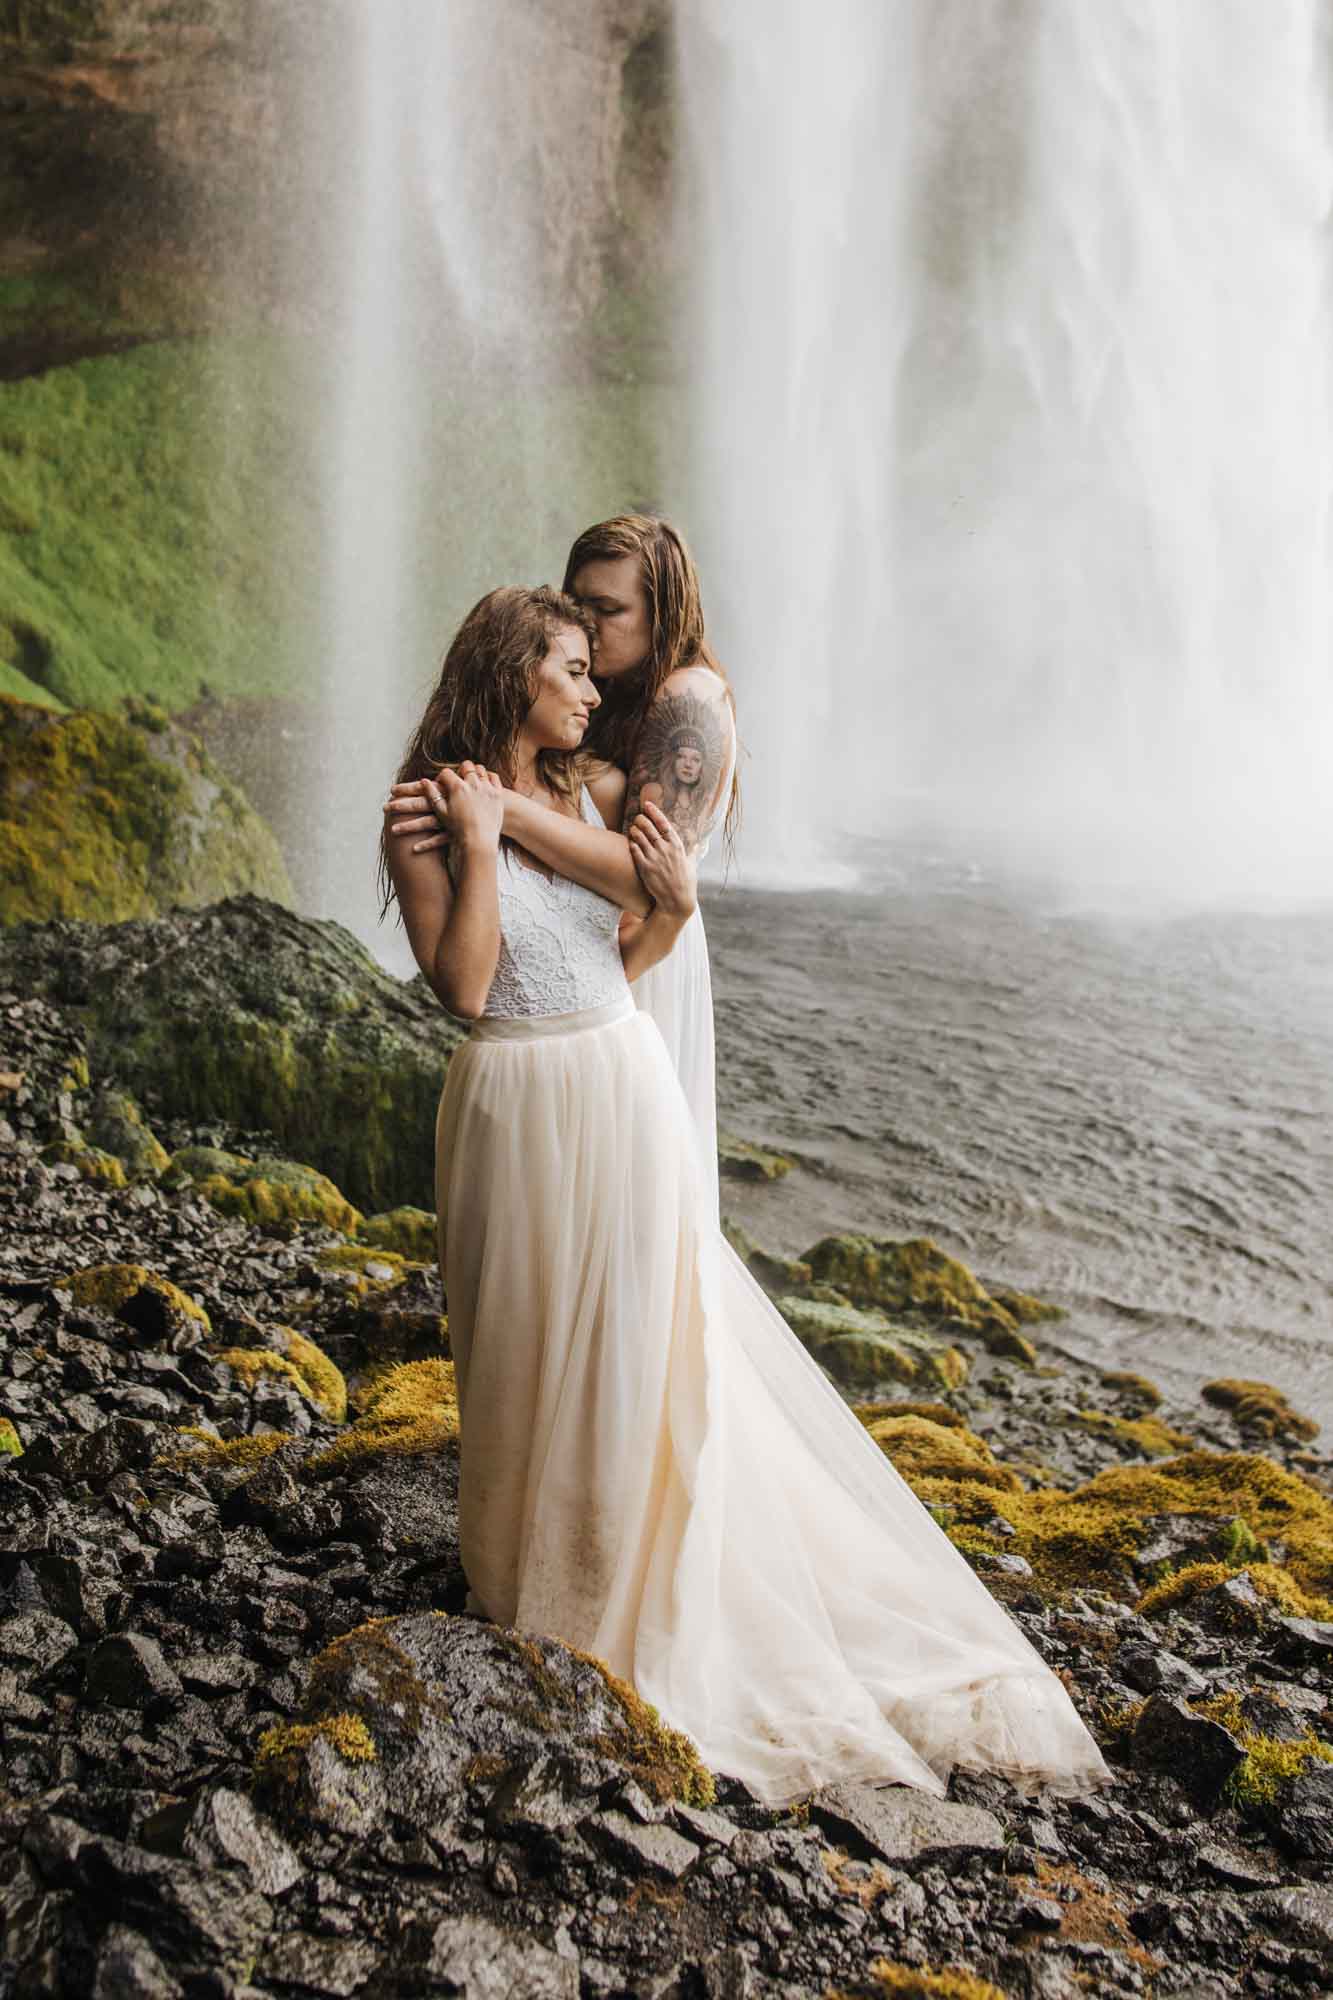 After an 18-month engagement, Cassidy and Hannah traveled from their home in West Hartford, Connecticut, to Iceland for an epic elopement. Their photographer Allie Dearie captured images of their love while the couple spent time together under massive cascading waterfalls and on the dark and moody beach.